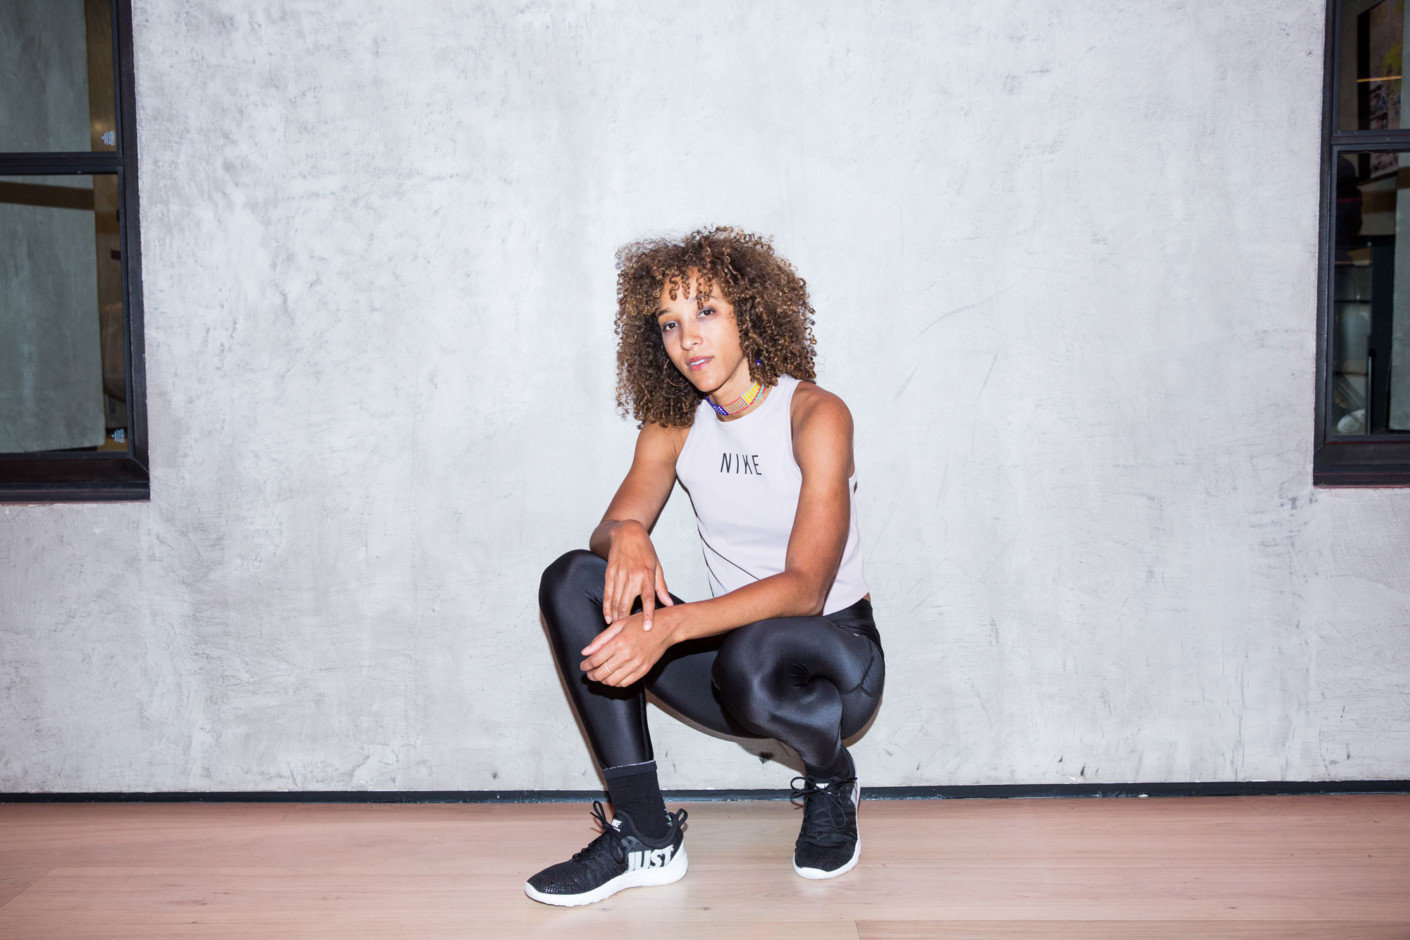 Trainer Traci Copeland Shares 6 Dance-Cardio Exercise Moves - Coveteur